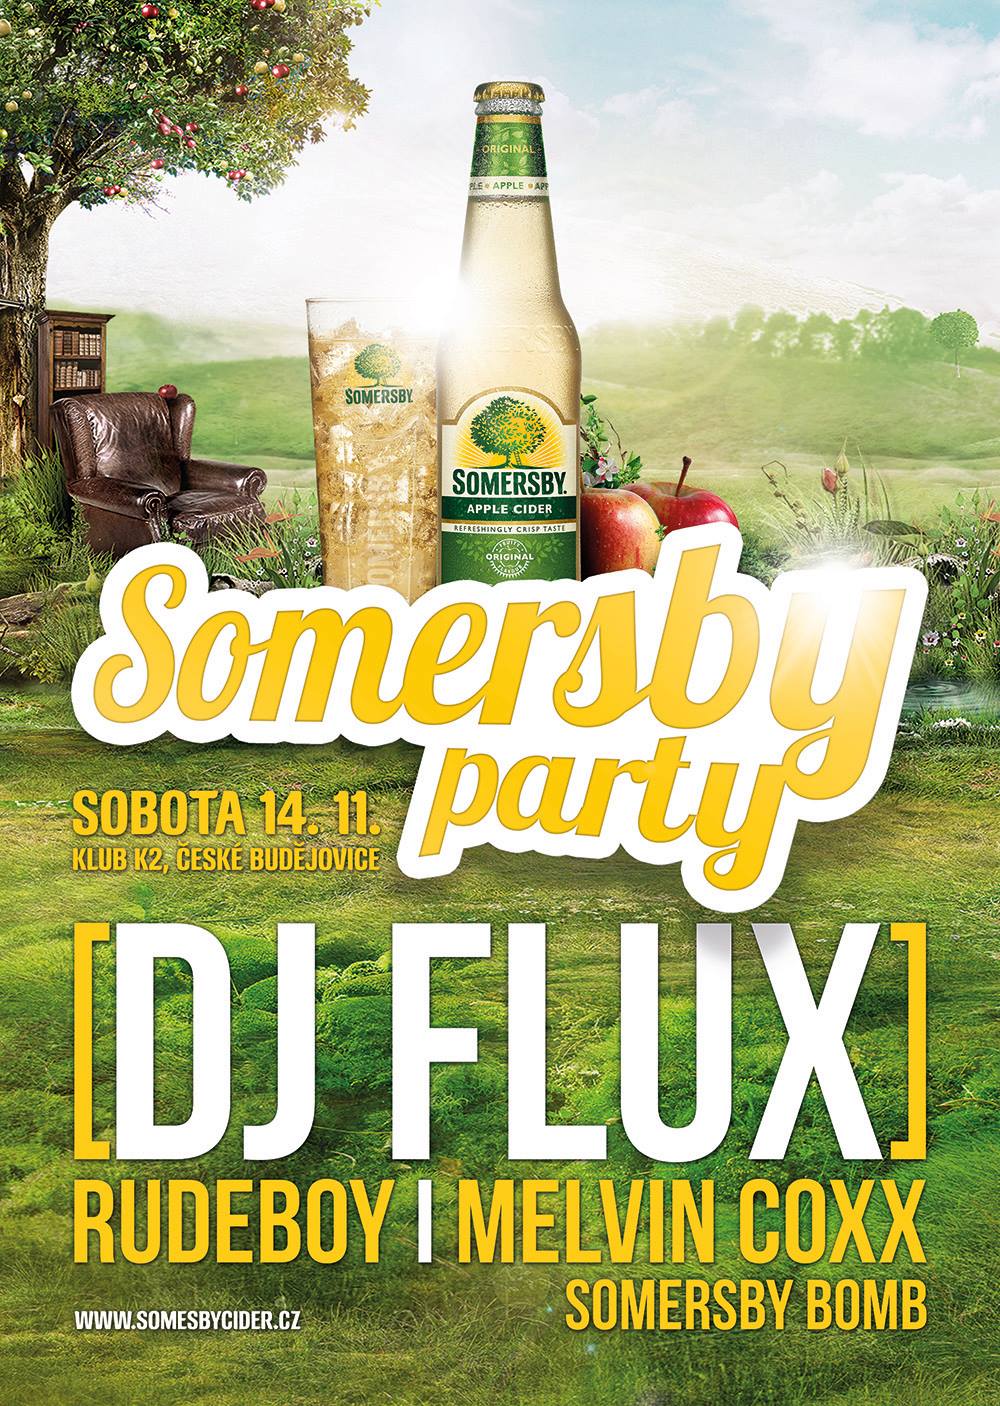 Somersby party